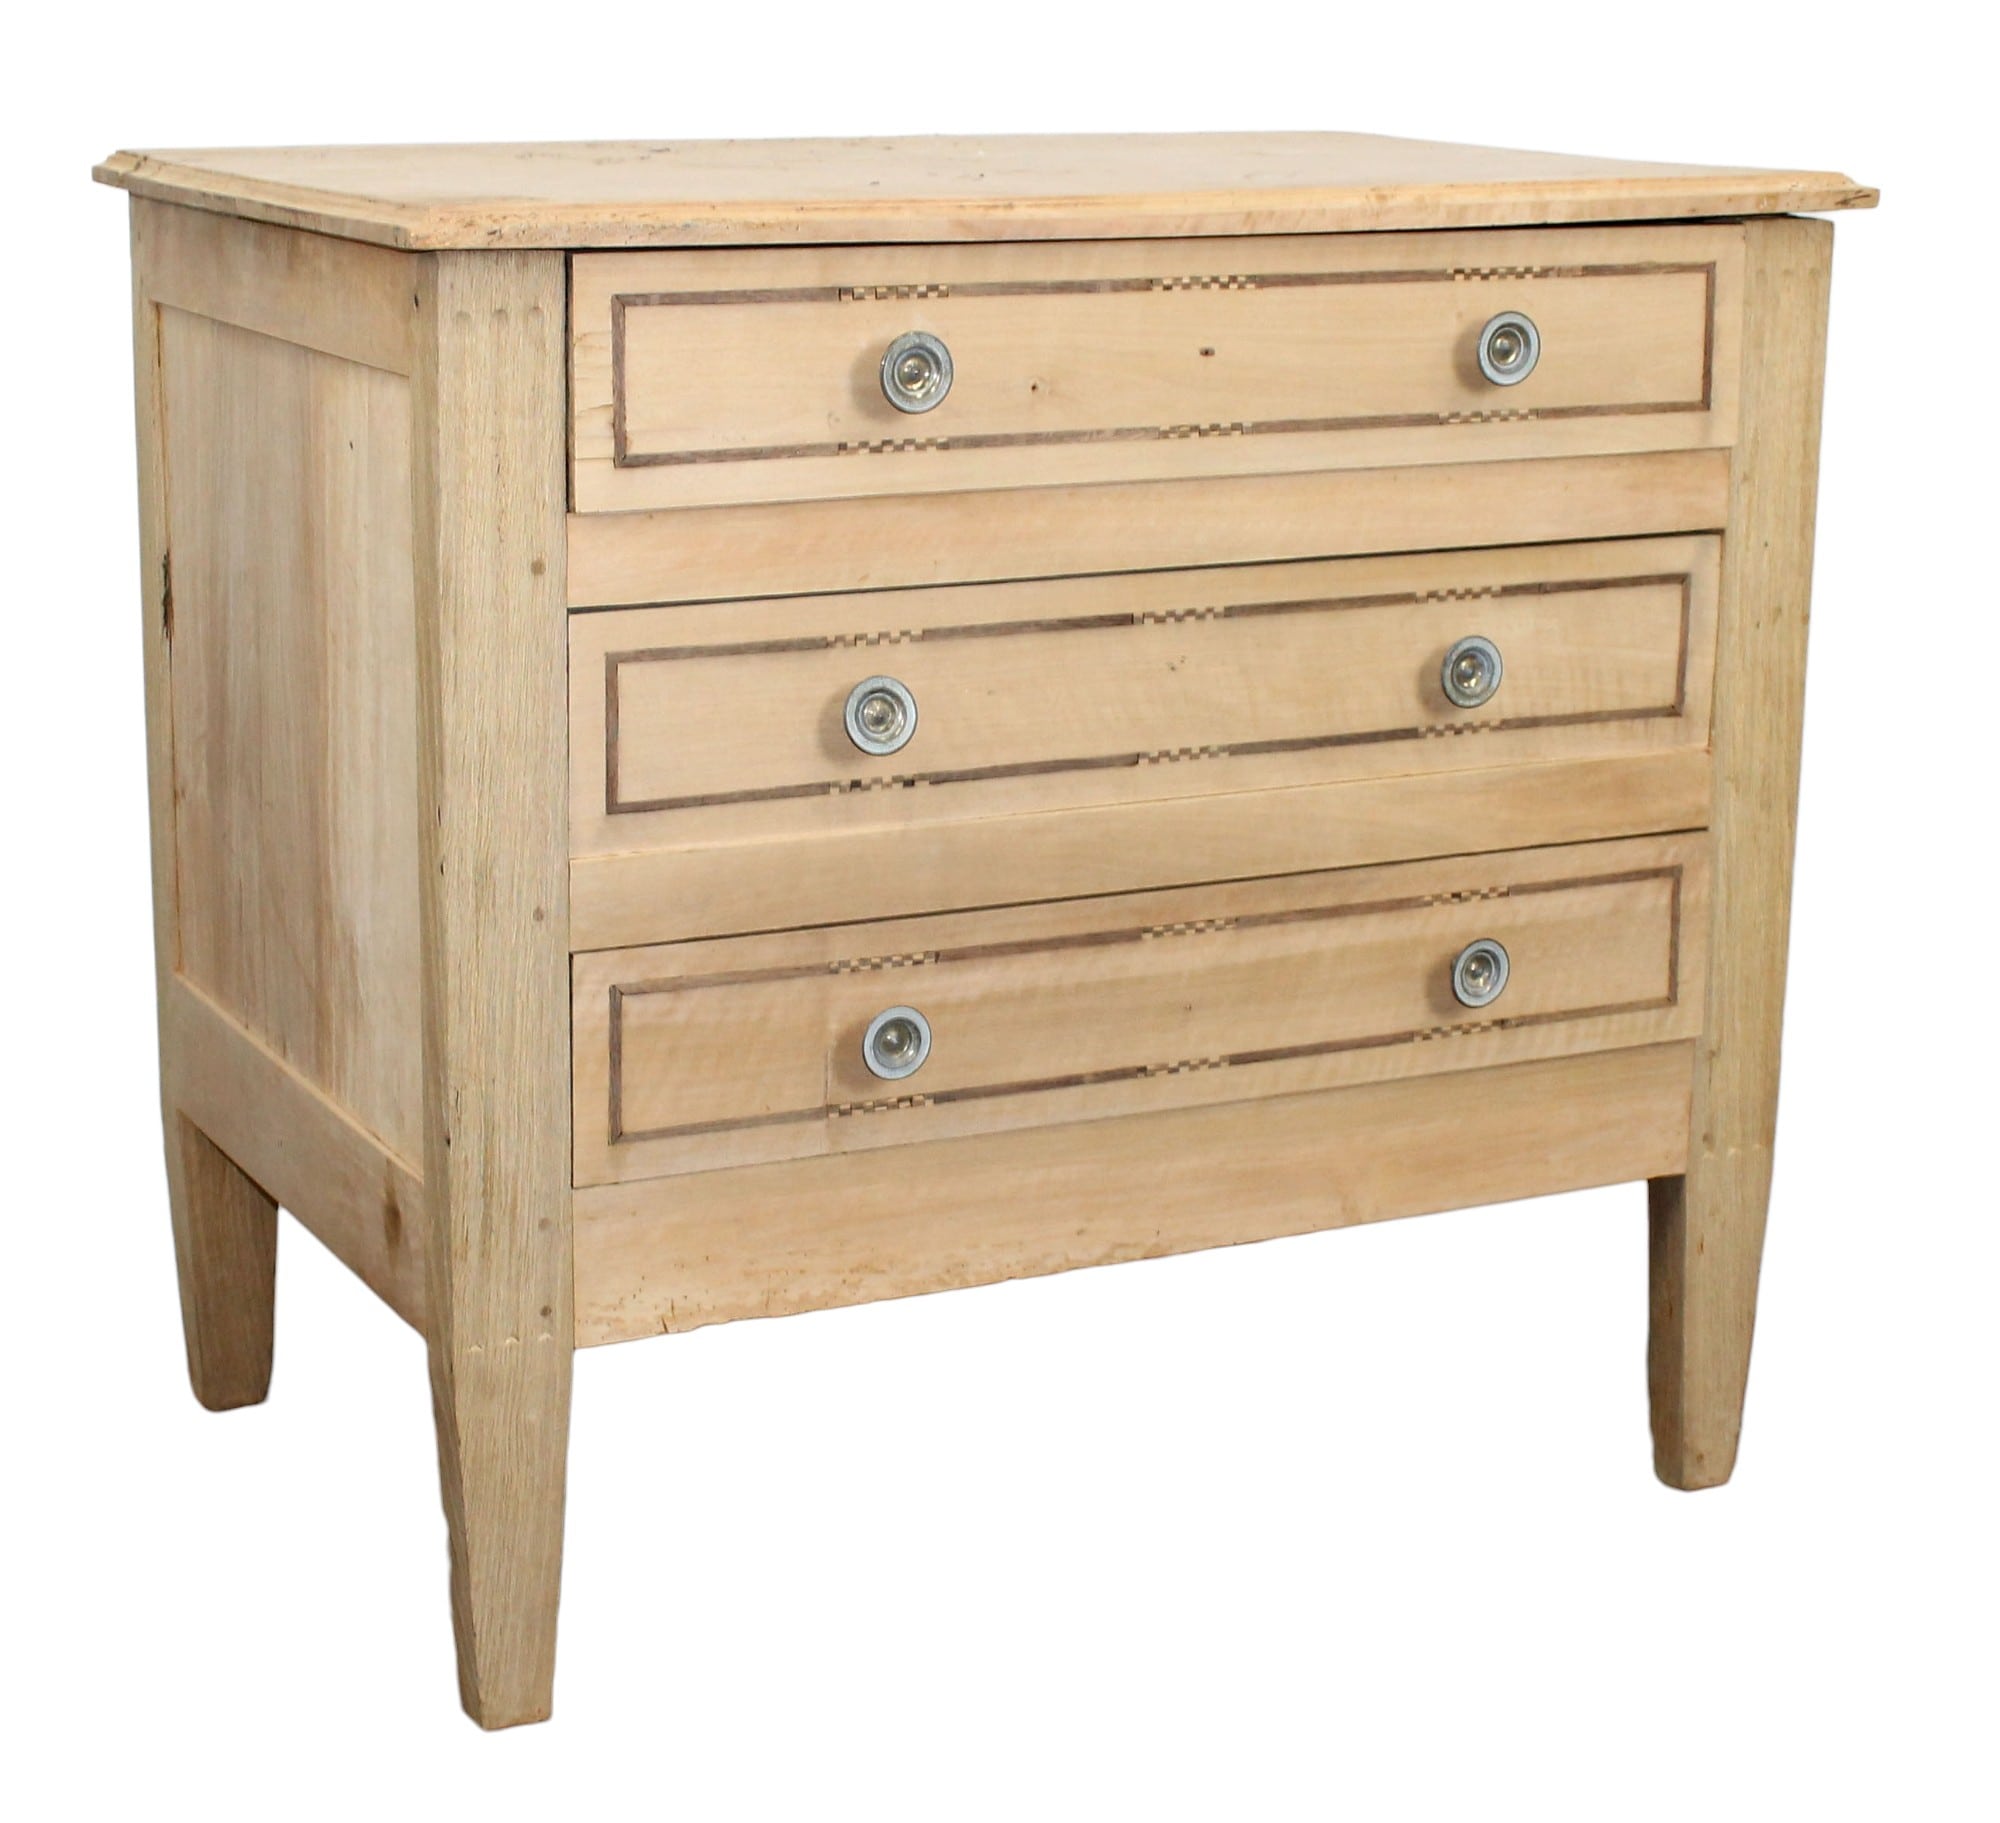 French Directoire 3 drawer commode in bleached walnut